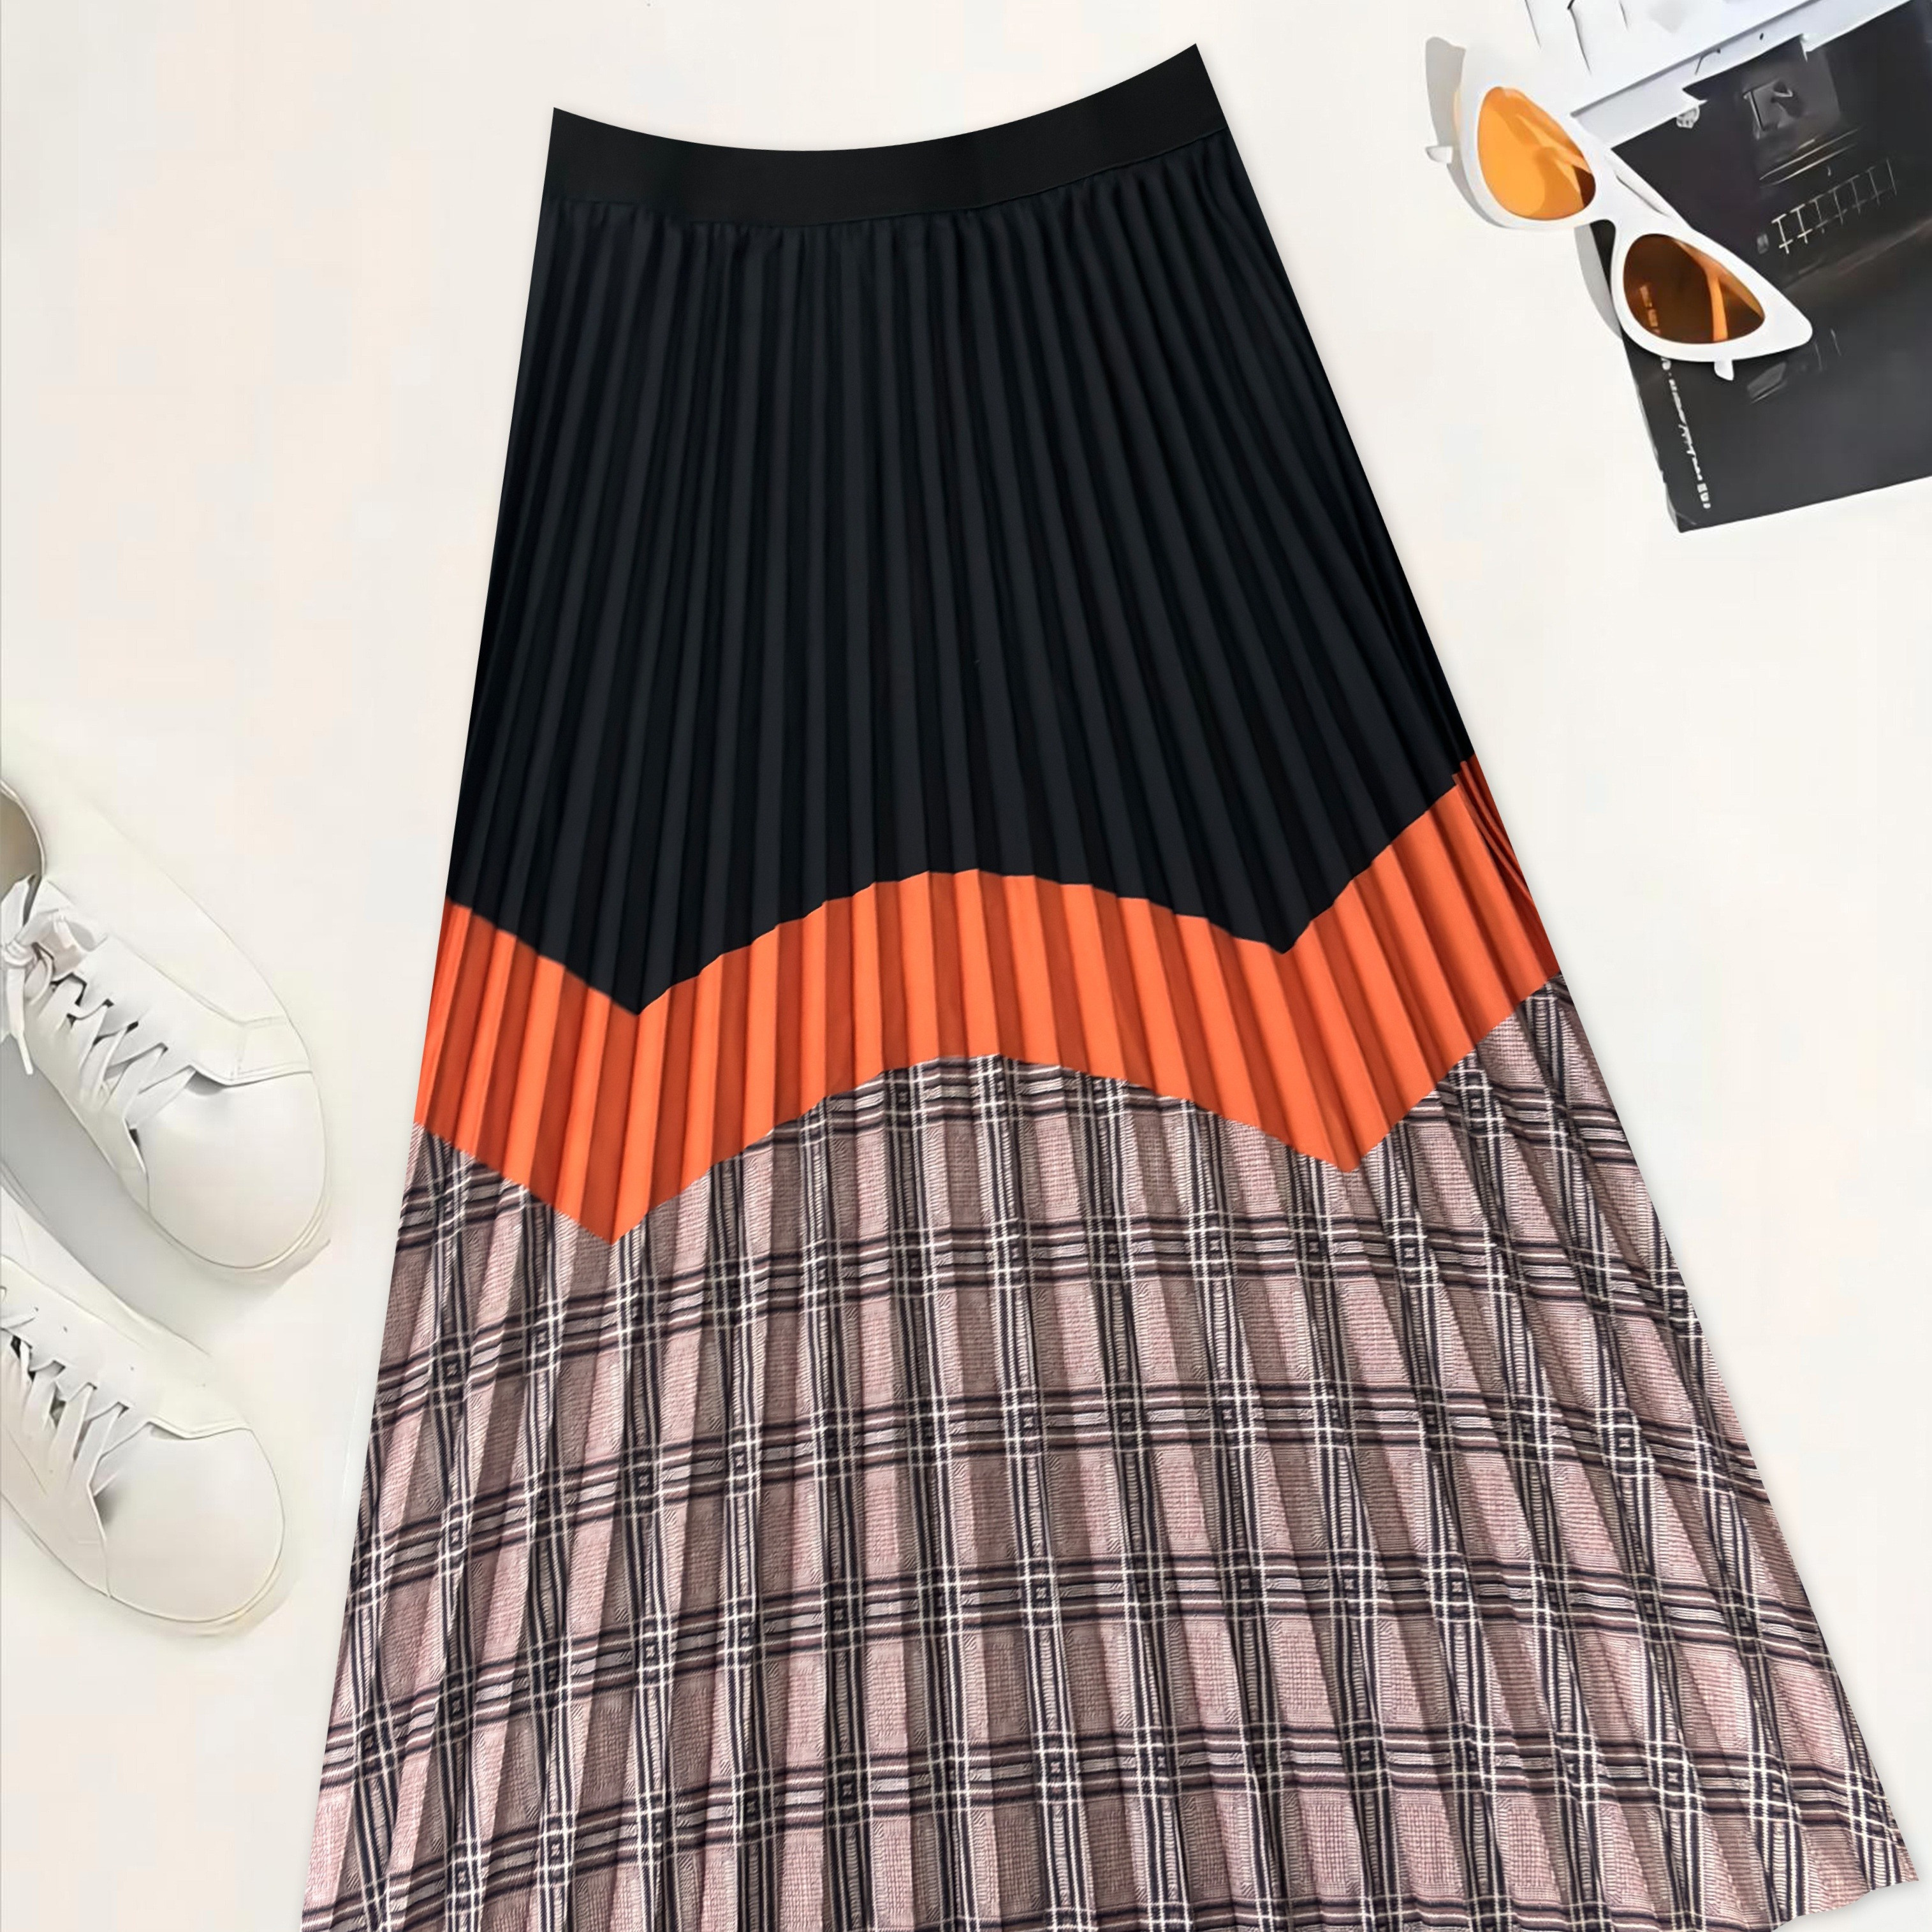 

Women's Pleated Skirt, Elegant Mid-length A-line Skirt With Color Block Print, Perfect For Home Wear And Street Fashion, Casual Style